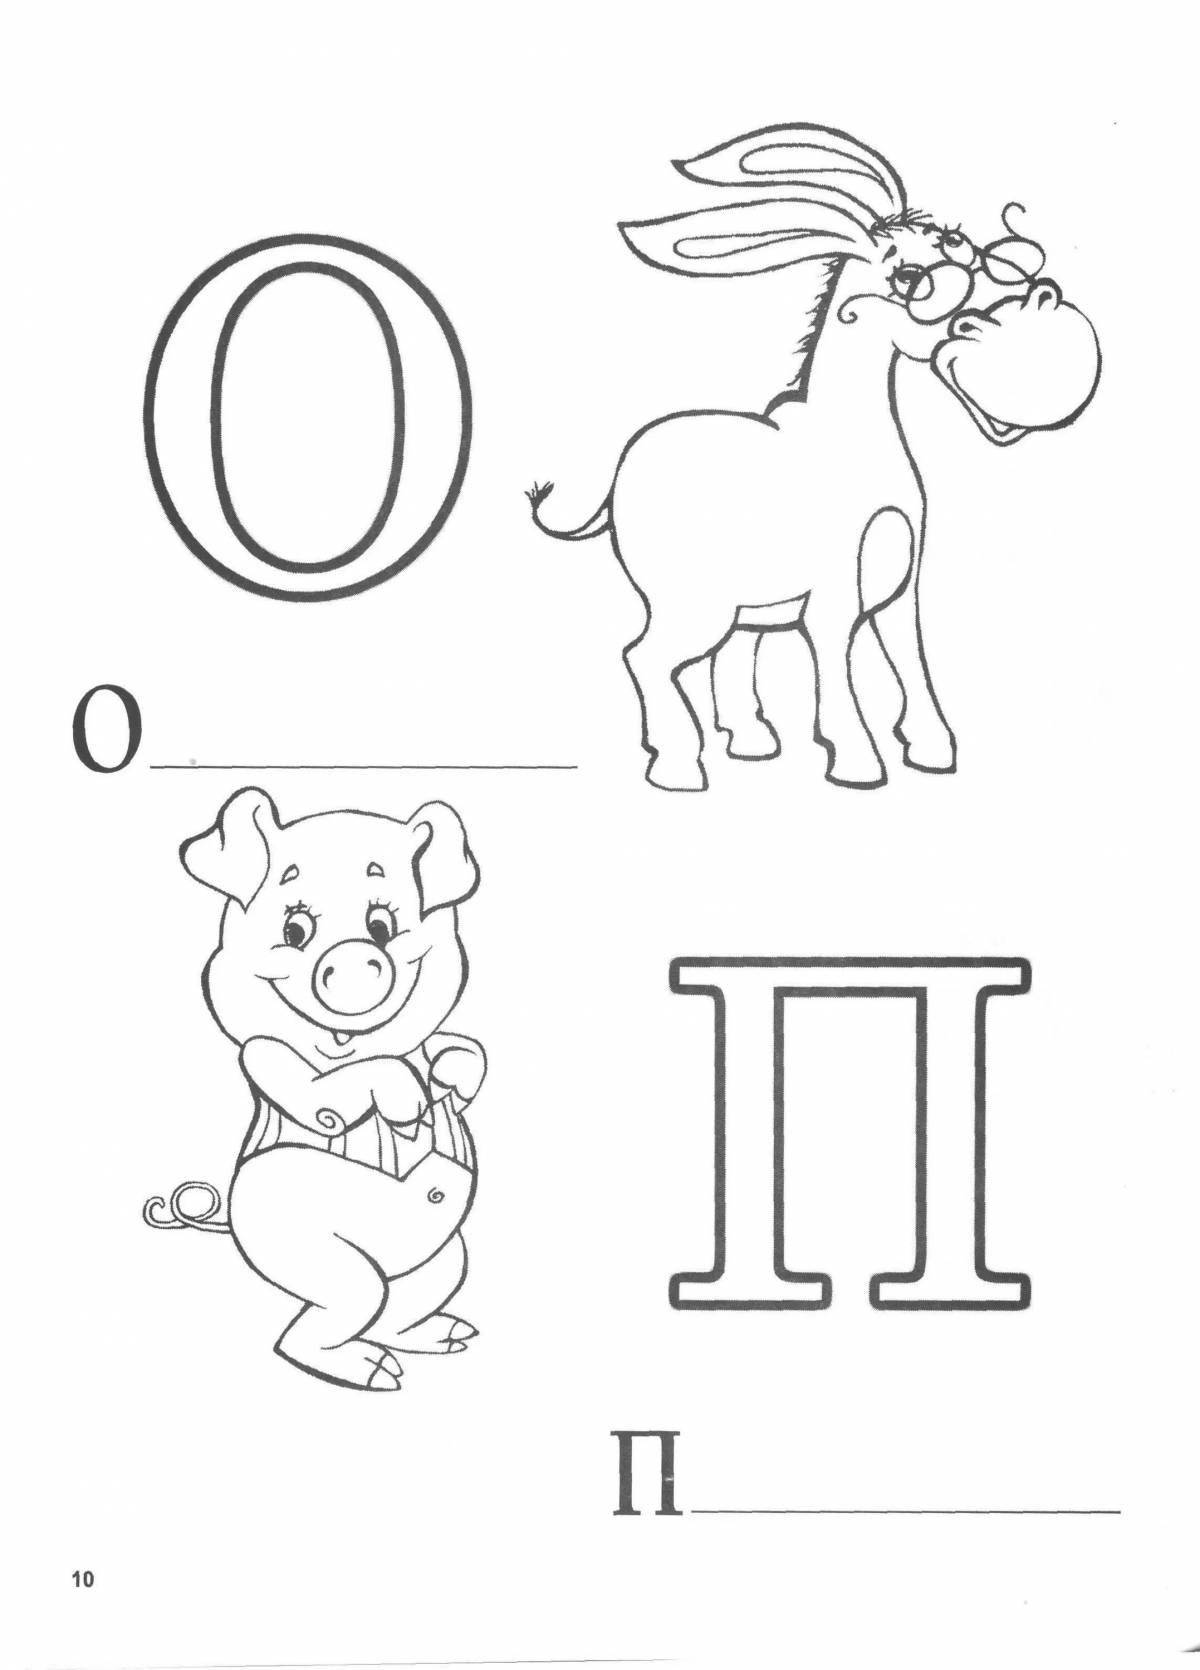 Creative coloring pages with letters for children 3-4 years old